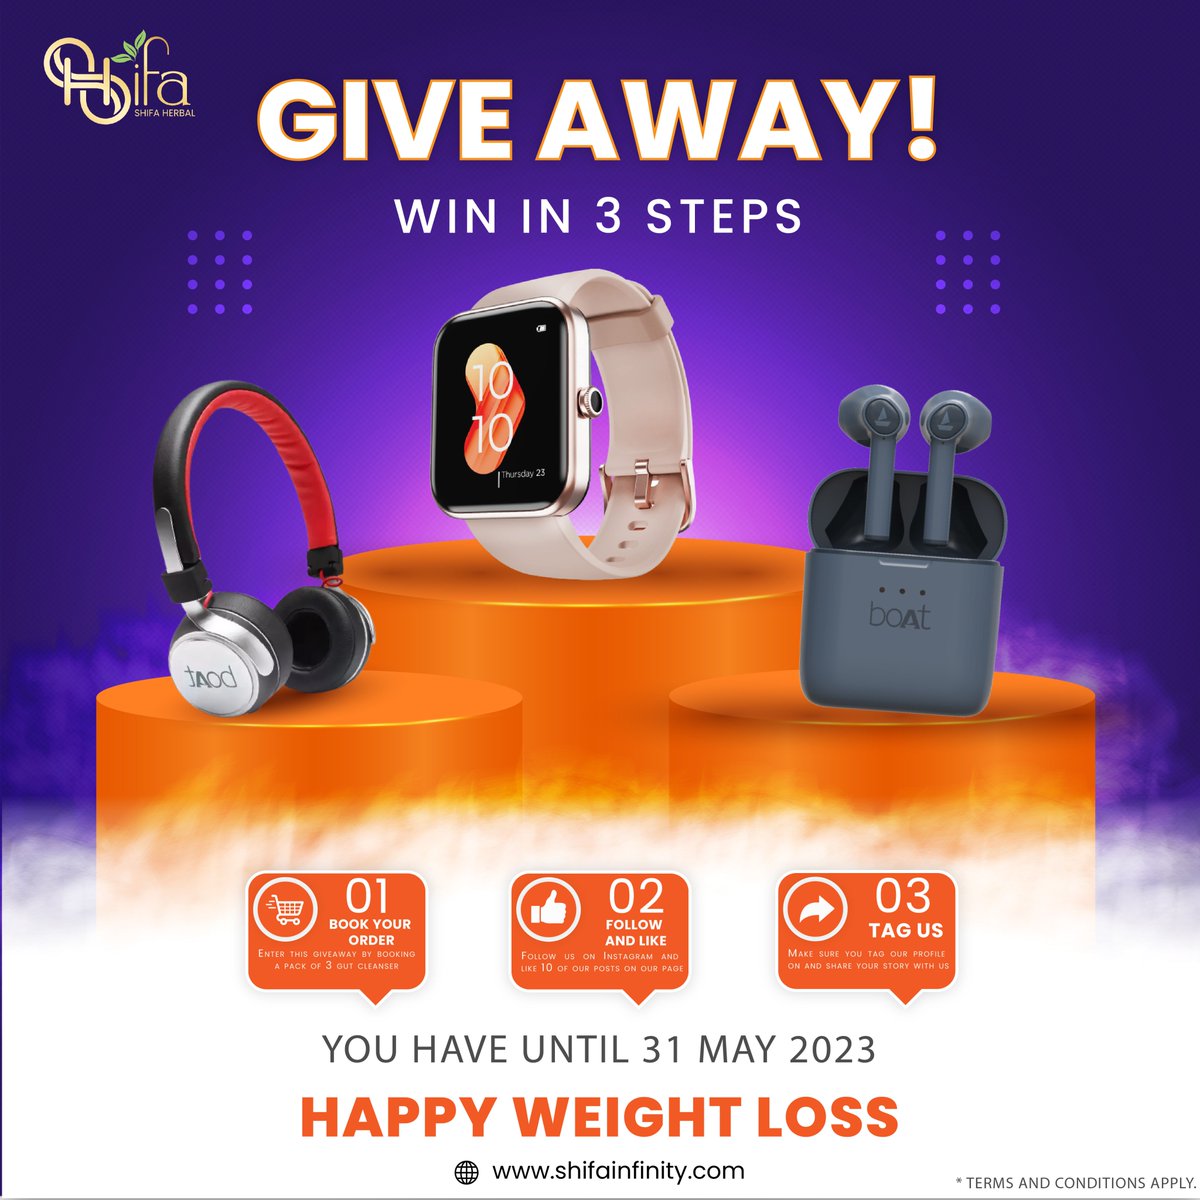 🎉Give Away - Win in 3 Steps...

👉 Book Your Order
👉Follow & Like
👉Tag Us
.
You Have Until 31 May 2023, To Participate In This Give-Away, So Act Fast!
.
#GiveawayAlert #WinIn3Steps #Hurry #Giveaway #HakimiShifaKhana #WeightLoss #weightlossjourney #weightlosstips